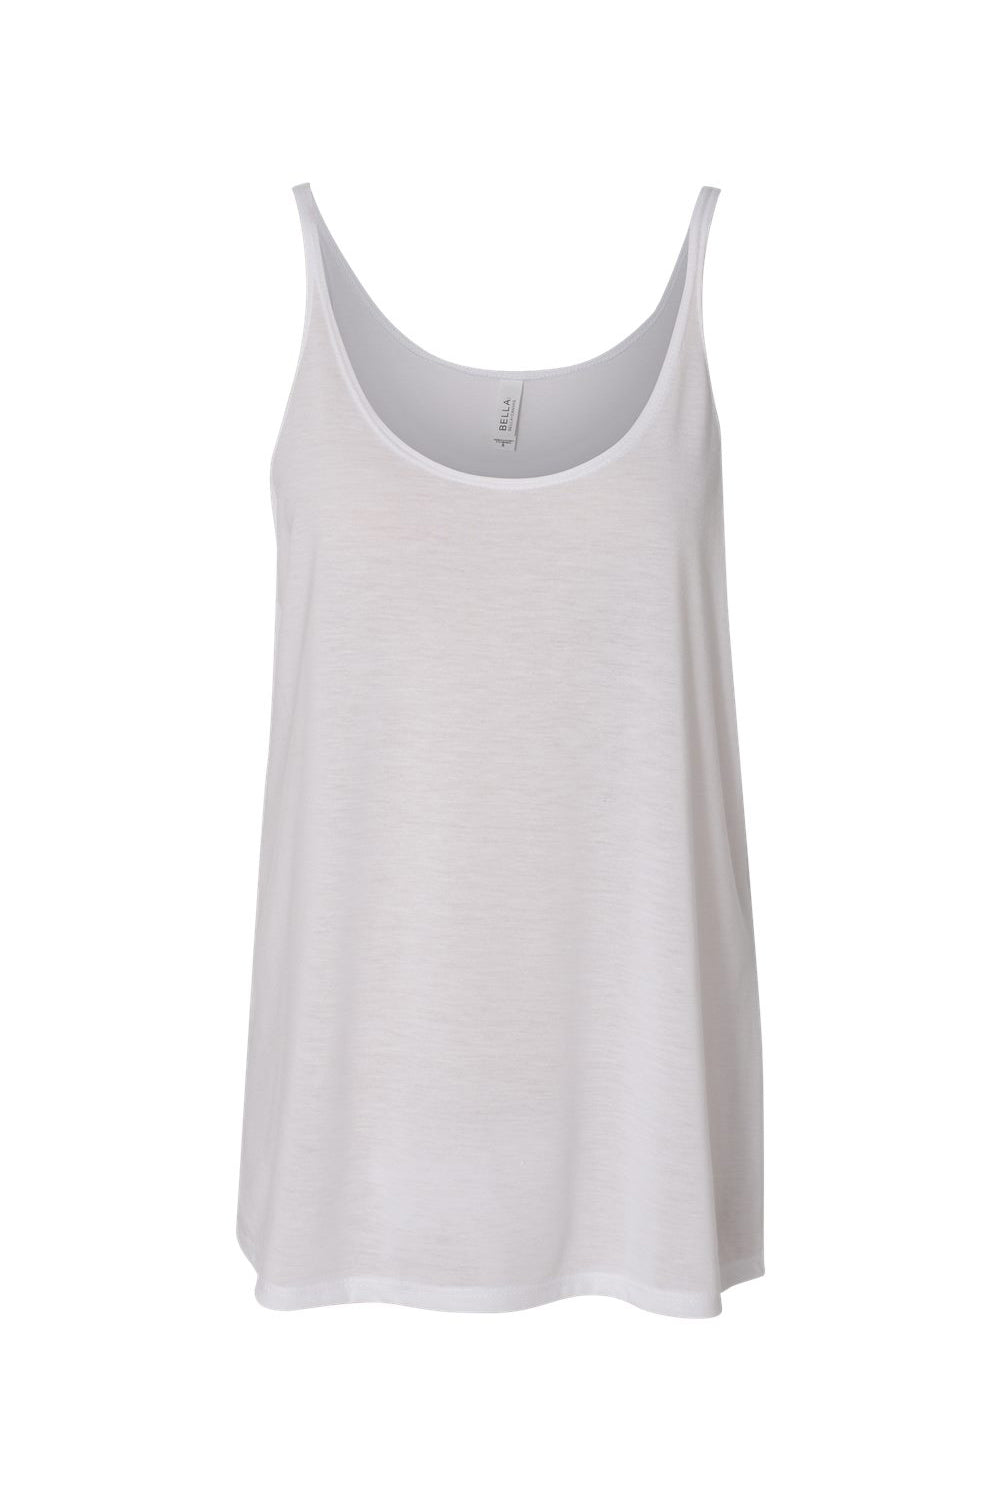 Bella + Canvas 8838 Womens Slouchy Tank Top White Flat Front